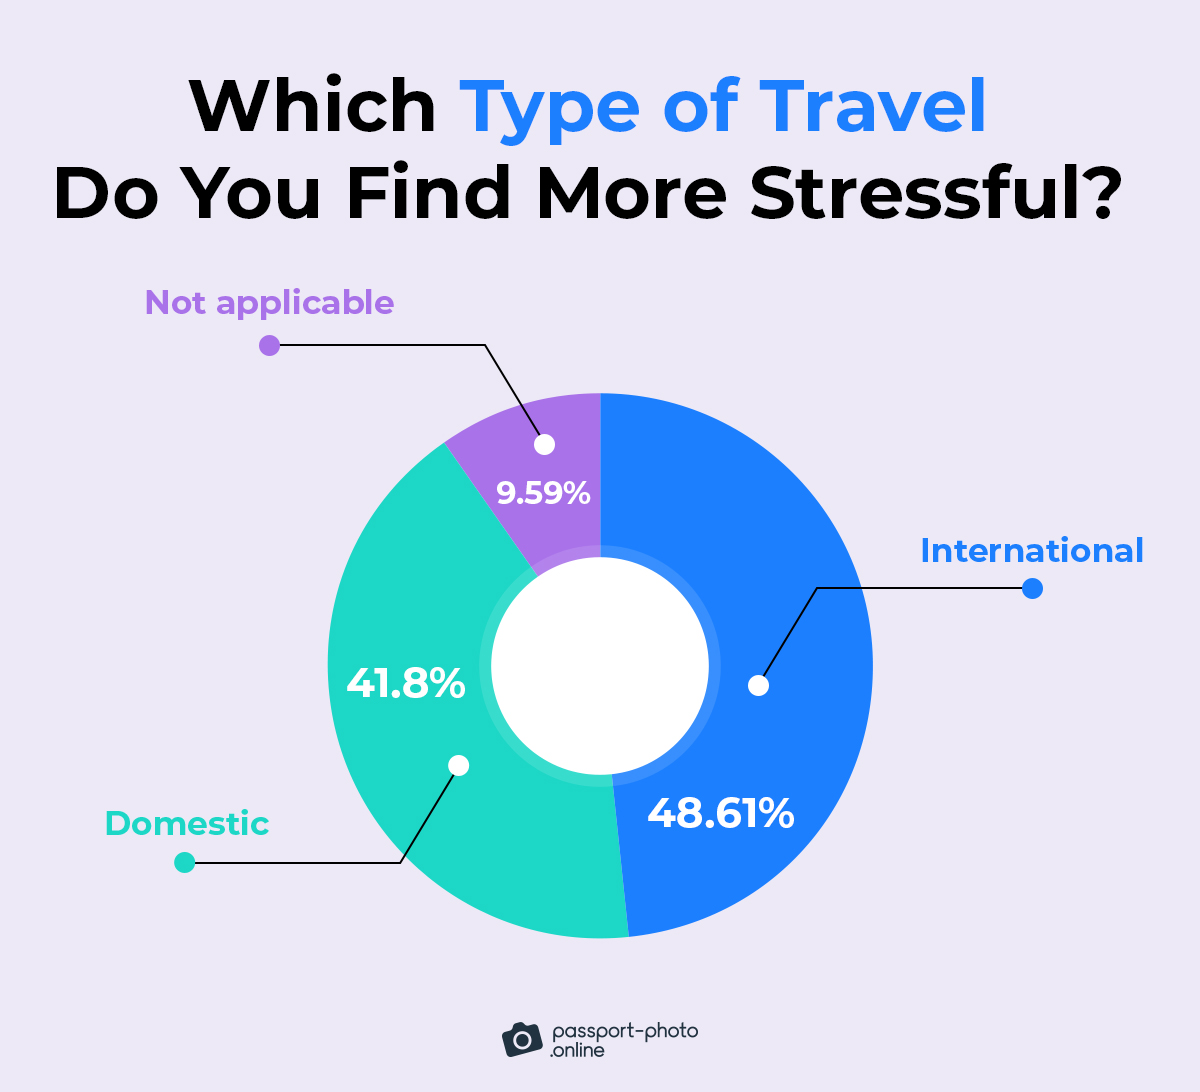 49% of people find international travel more nerve-racking than domestic travel